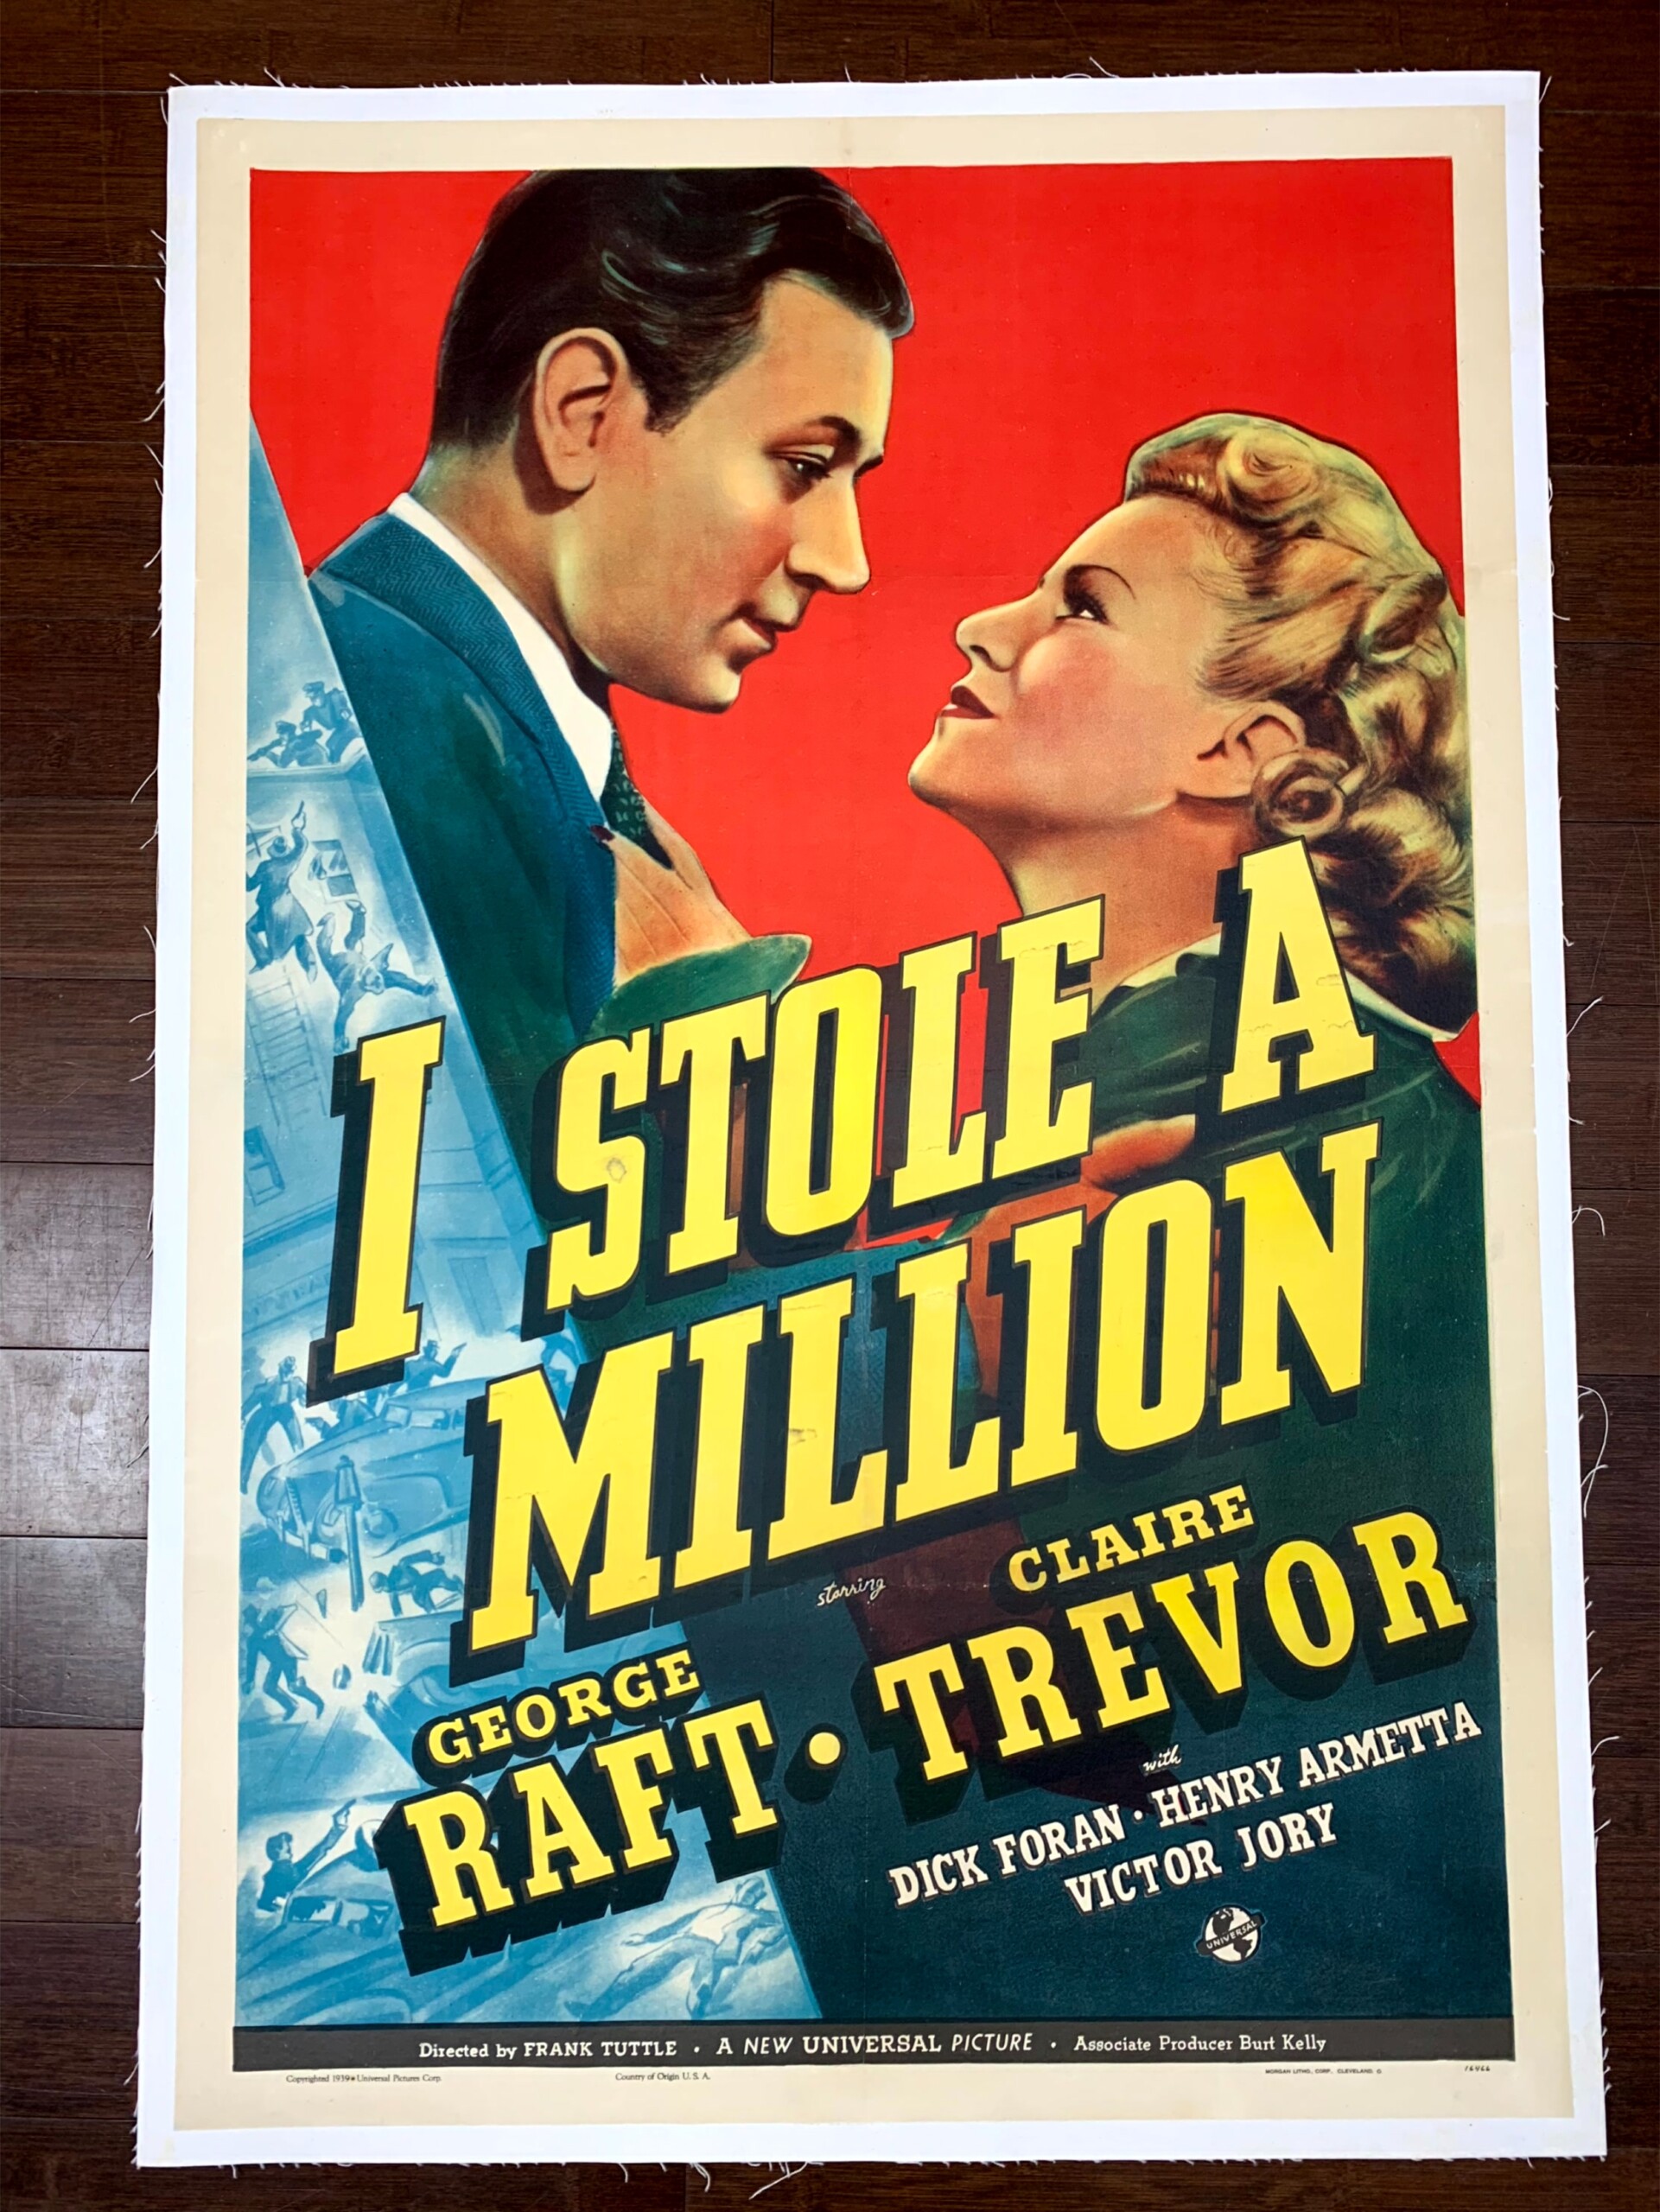 I Stole A Million - George Raft (1939) US One Sheet Movie Poster LB